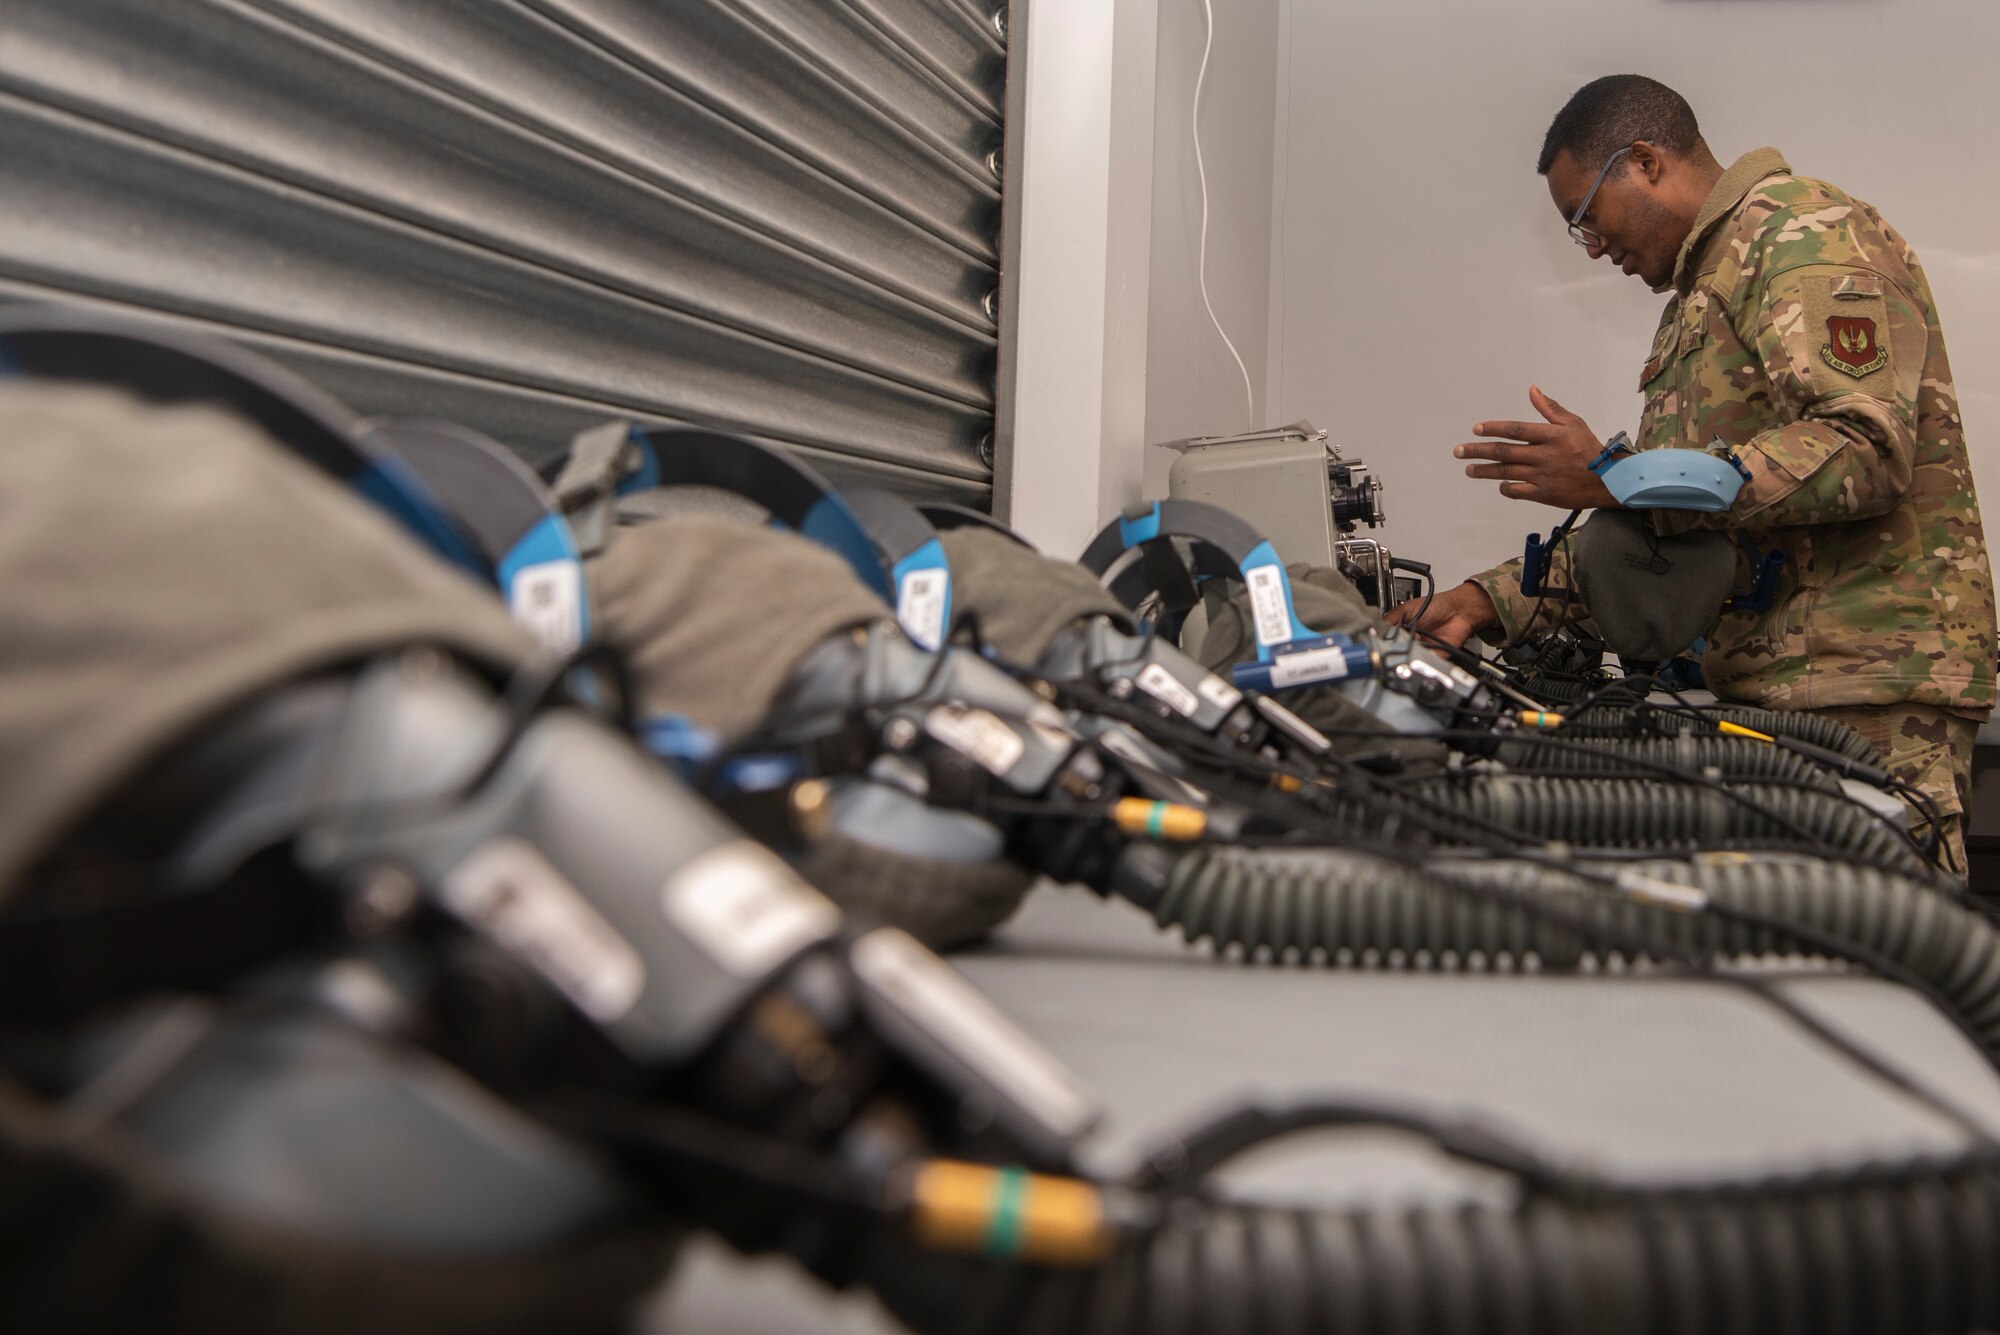 Tech. Sgt. Alexander Johnston, 100th Operations Support Squadron aircrew flight equipment lead trainer, tests a quick-don oxygen mask for functionality at RAF Mildenhall, England, Dec. 3, 2019. The AFE Airmen protect aircrew by ensuring their equipment is operational and free of defects. (U.S. Air Force photo by Airman 1st Class Joseph Barron)